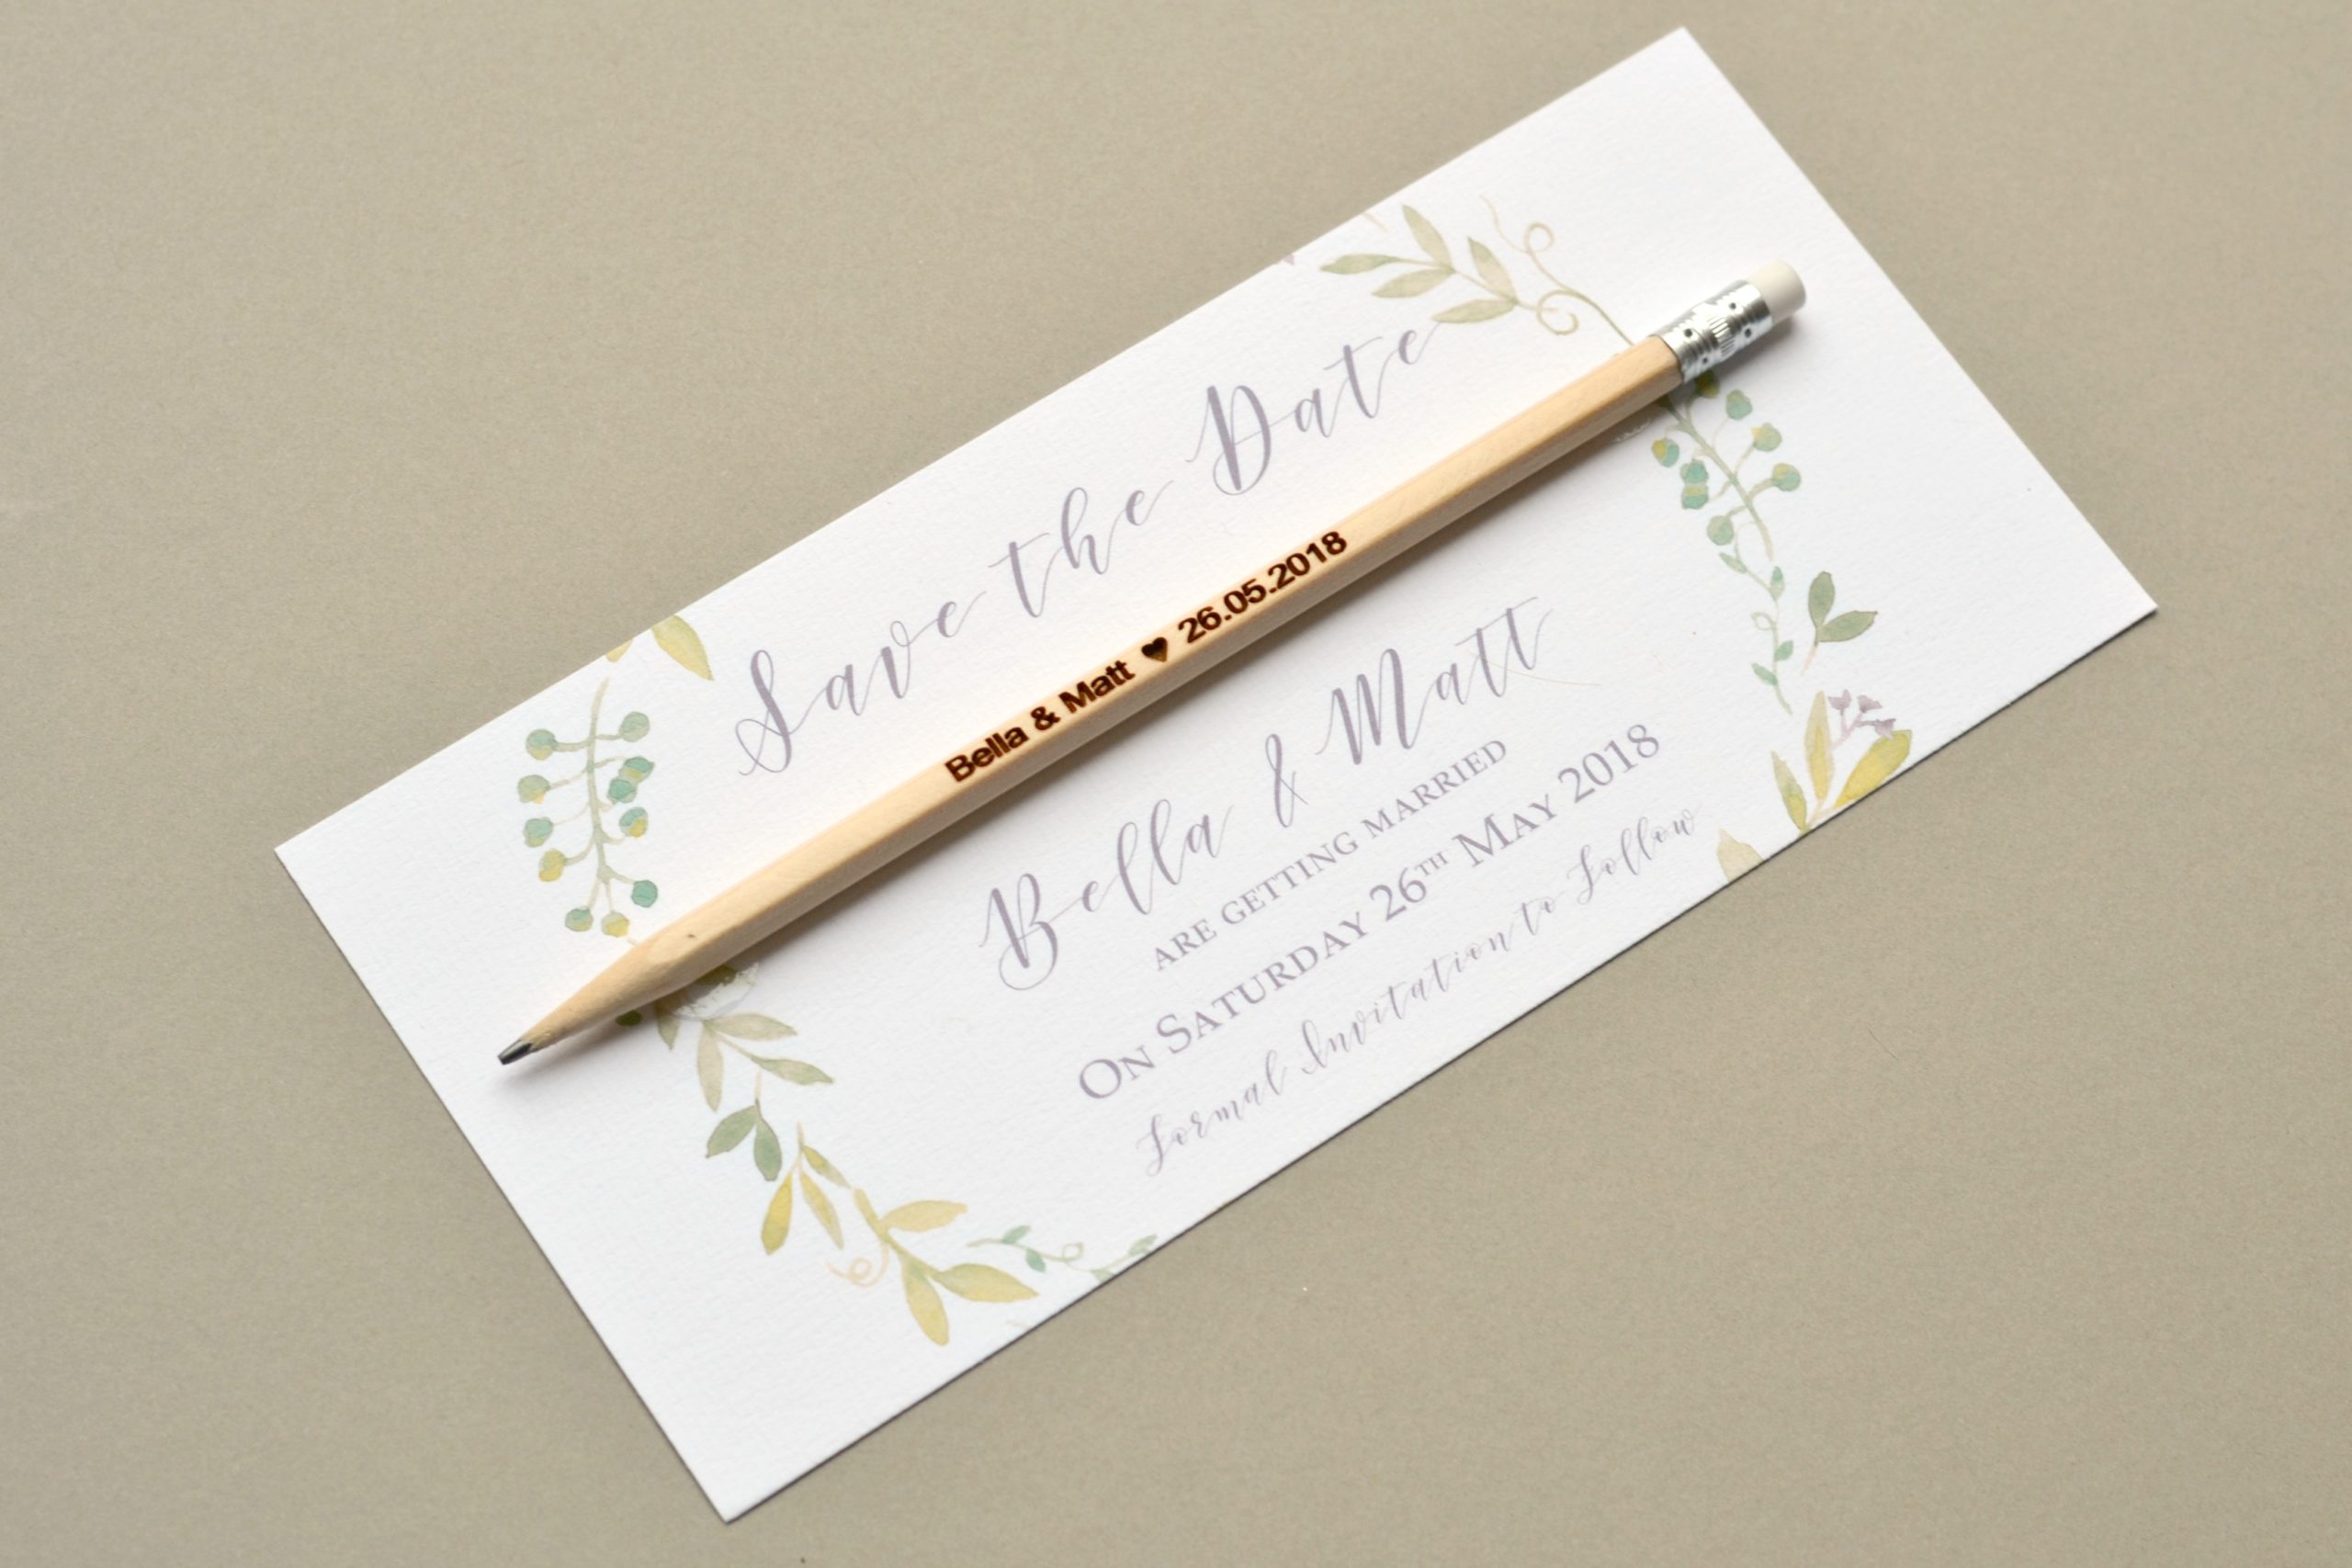 Pencil us In Save the Date Wedding Announcement Cards Wedding Stationery 